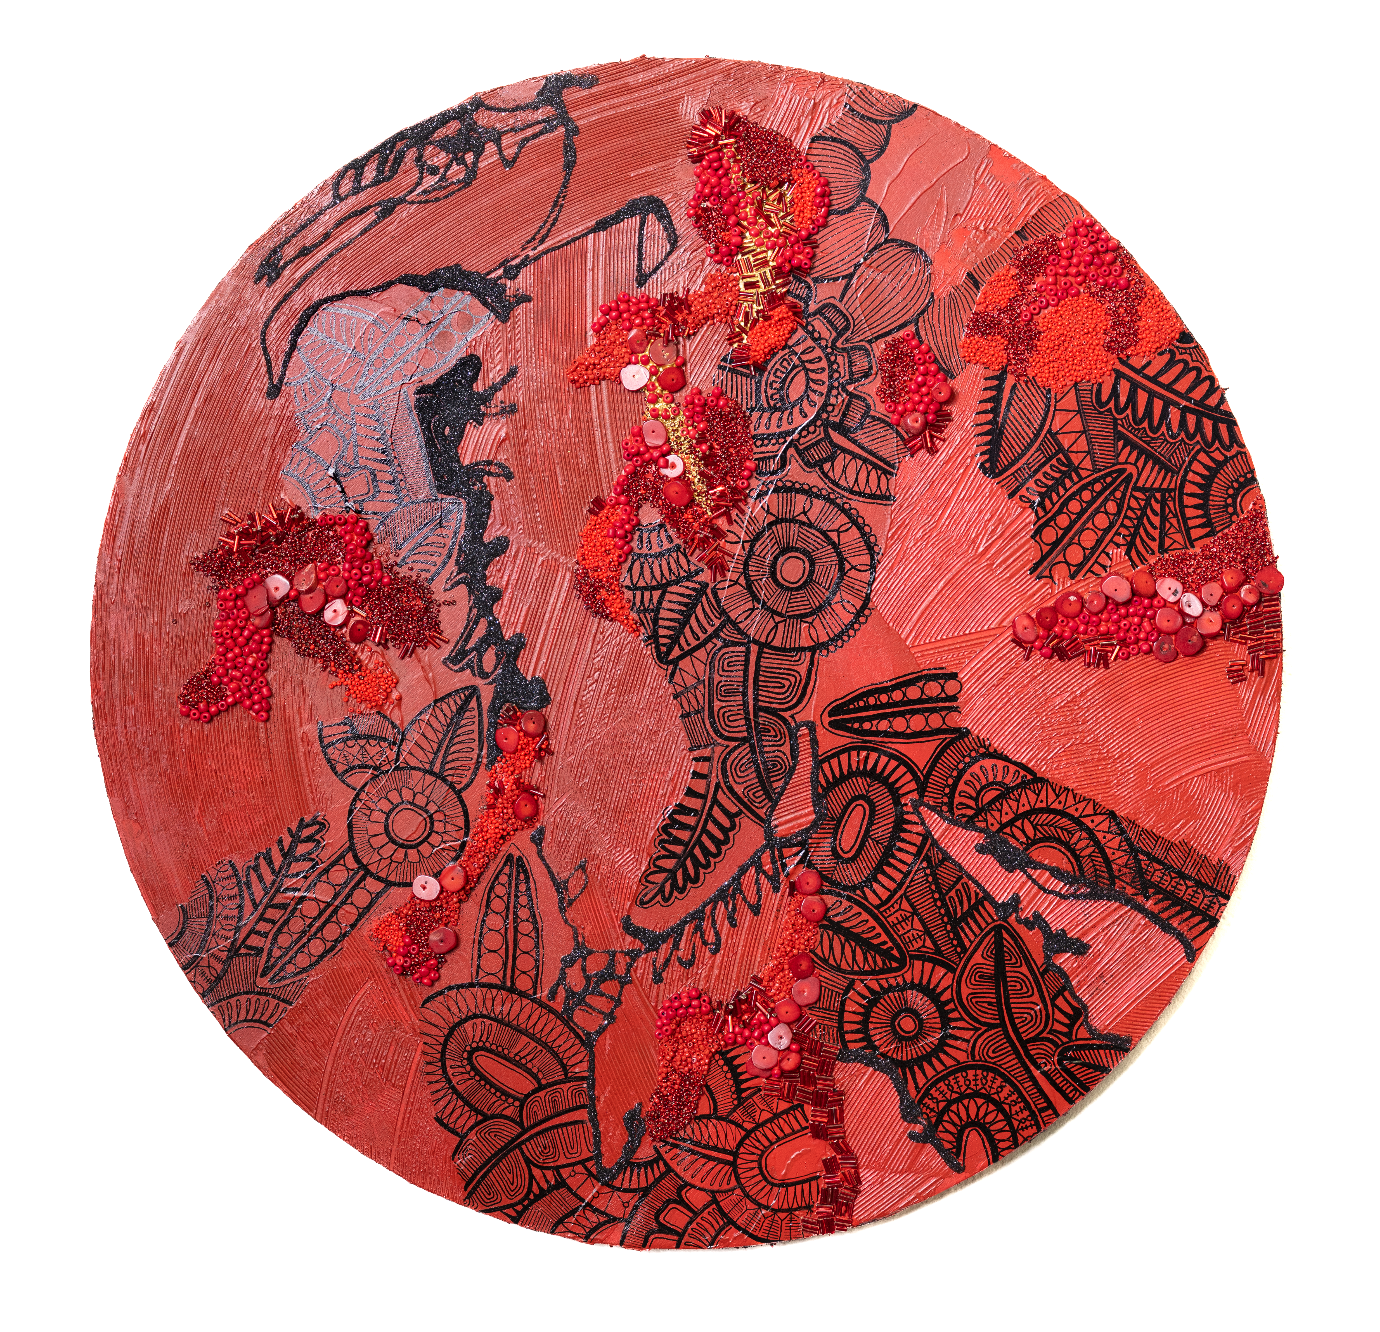  You Can't Burn Womxn Made Of Fire  2023  oil, acrylic, glitter, glass seed beads, and coral on birch  20 diameter inches 